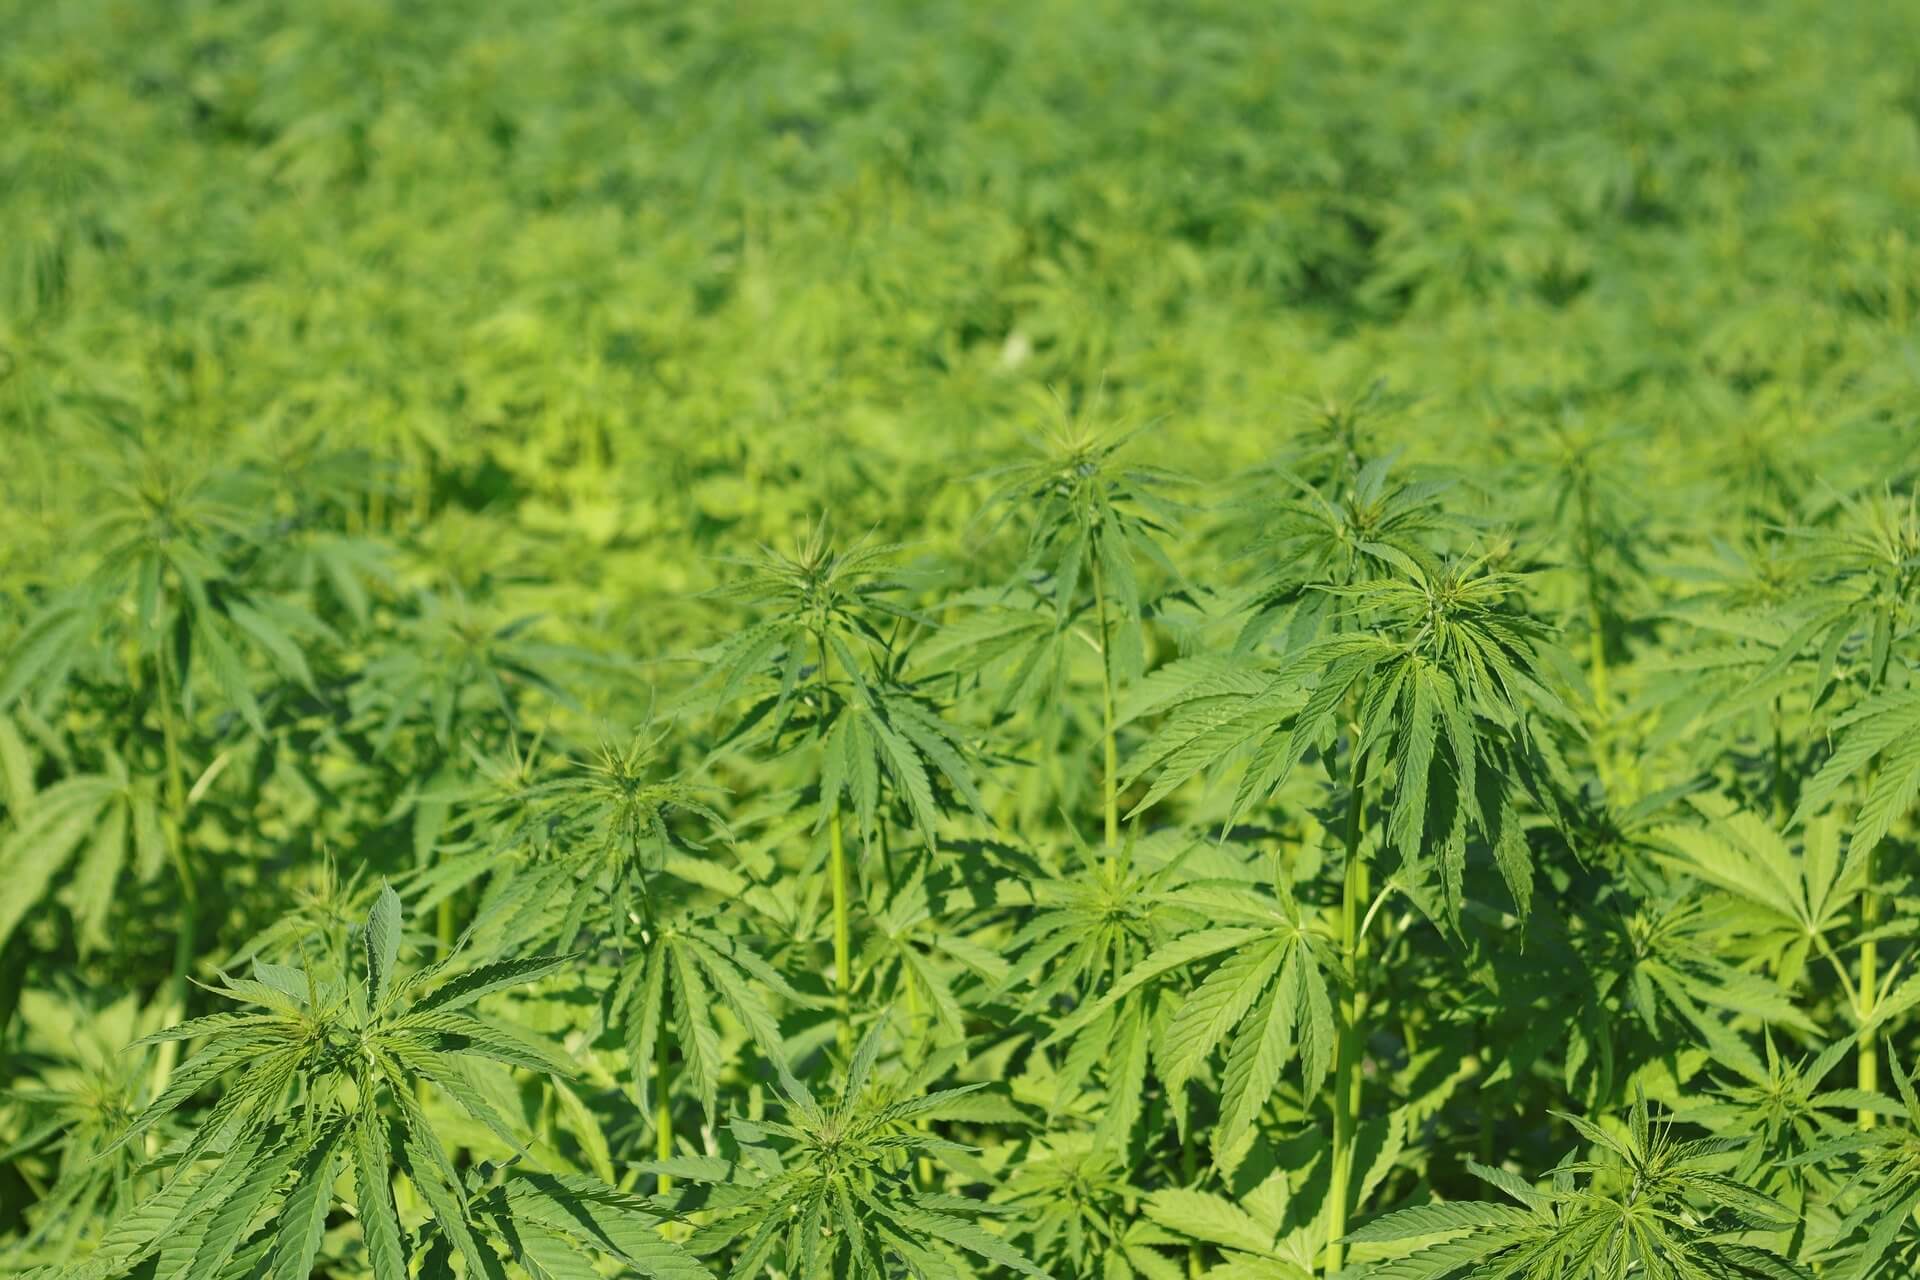 farmers are harvesting hemp in Texas for the first time in decades